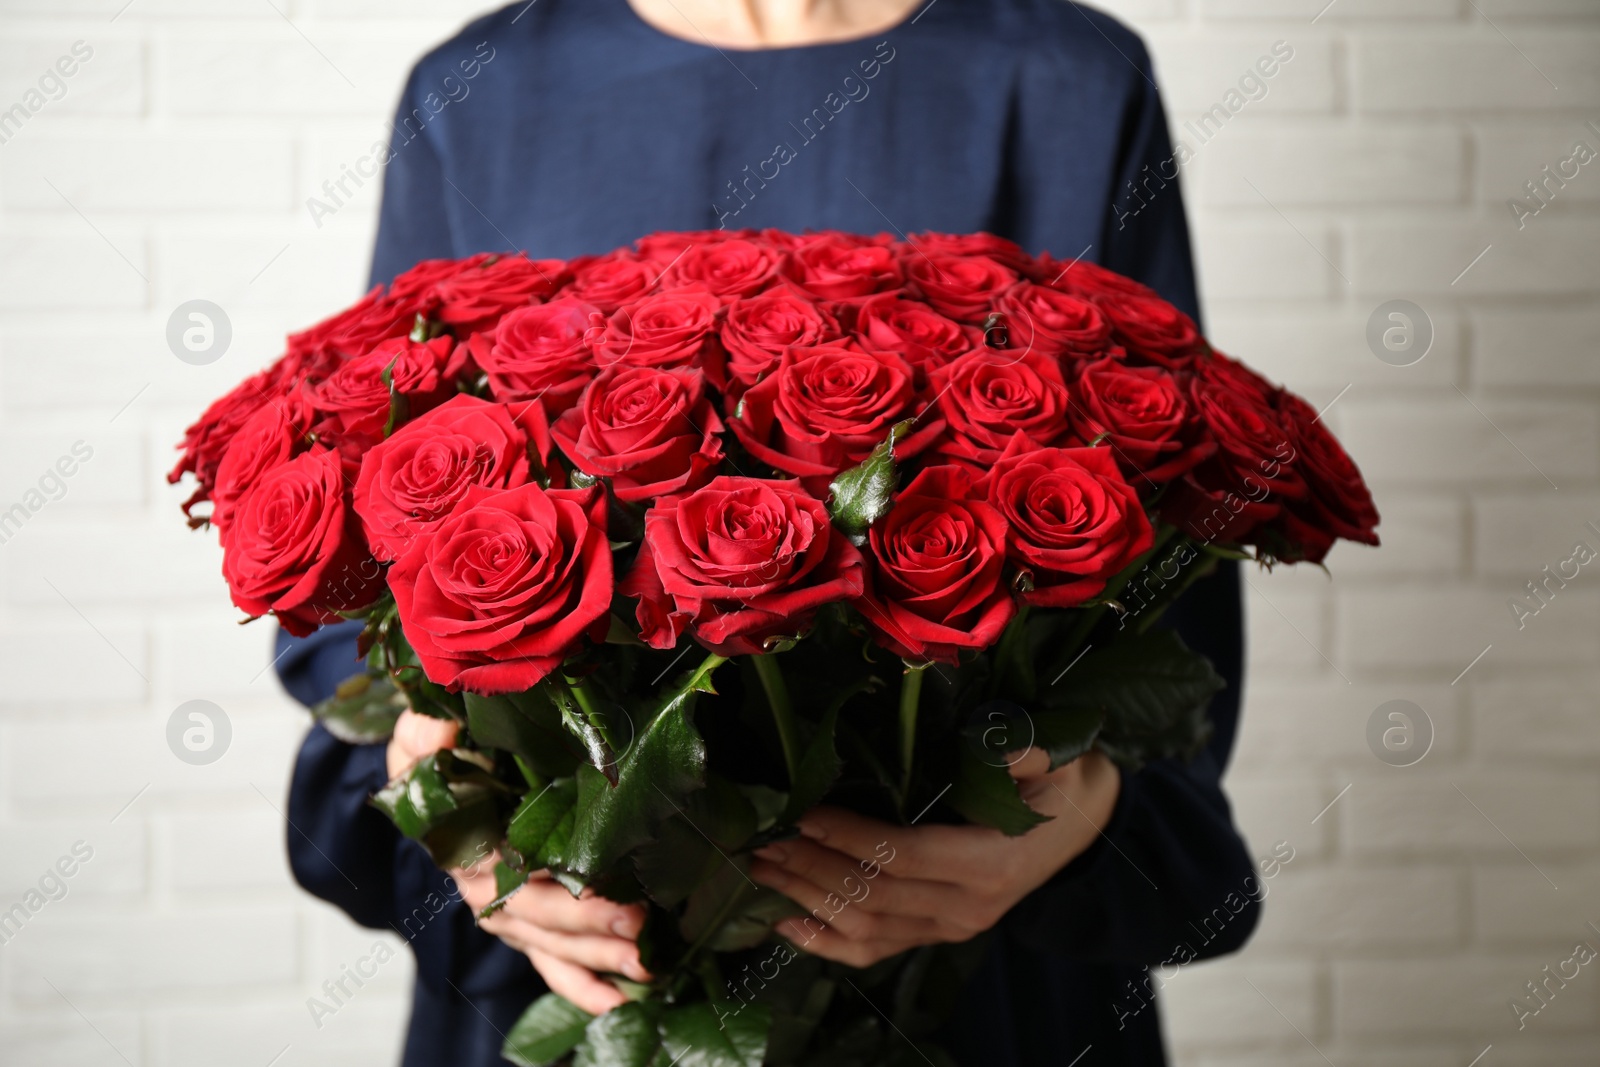 Photo of Woman holding luxury bouquet of fresh red roses near white brick wall, closeup